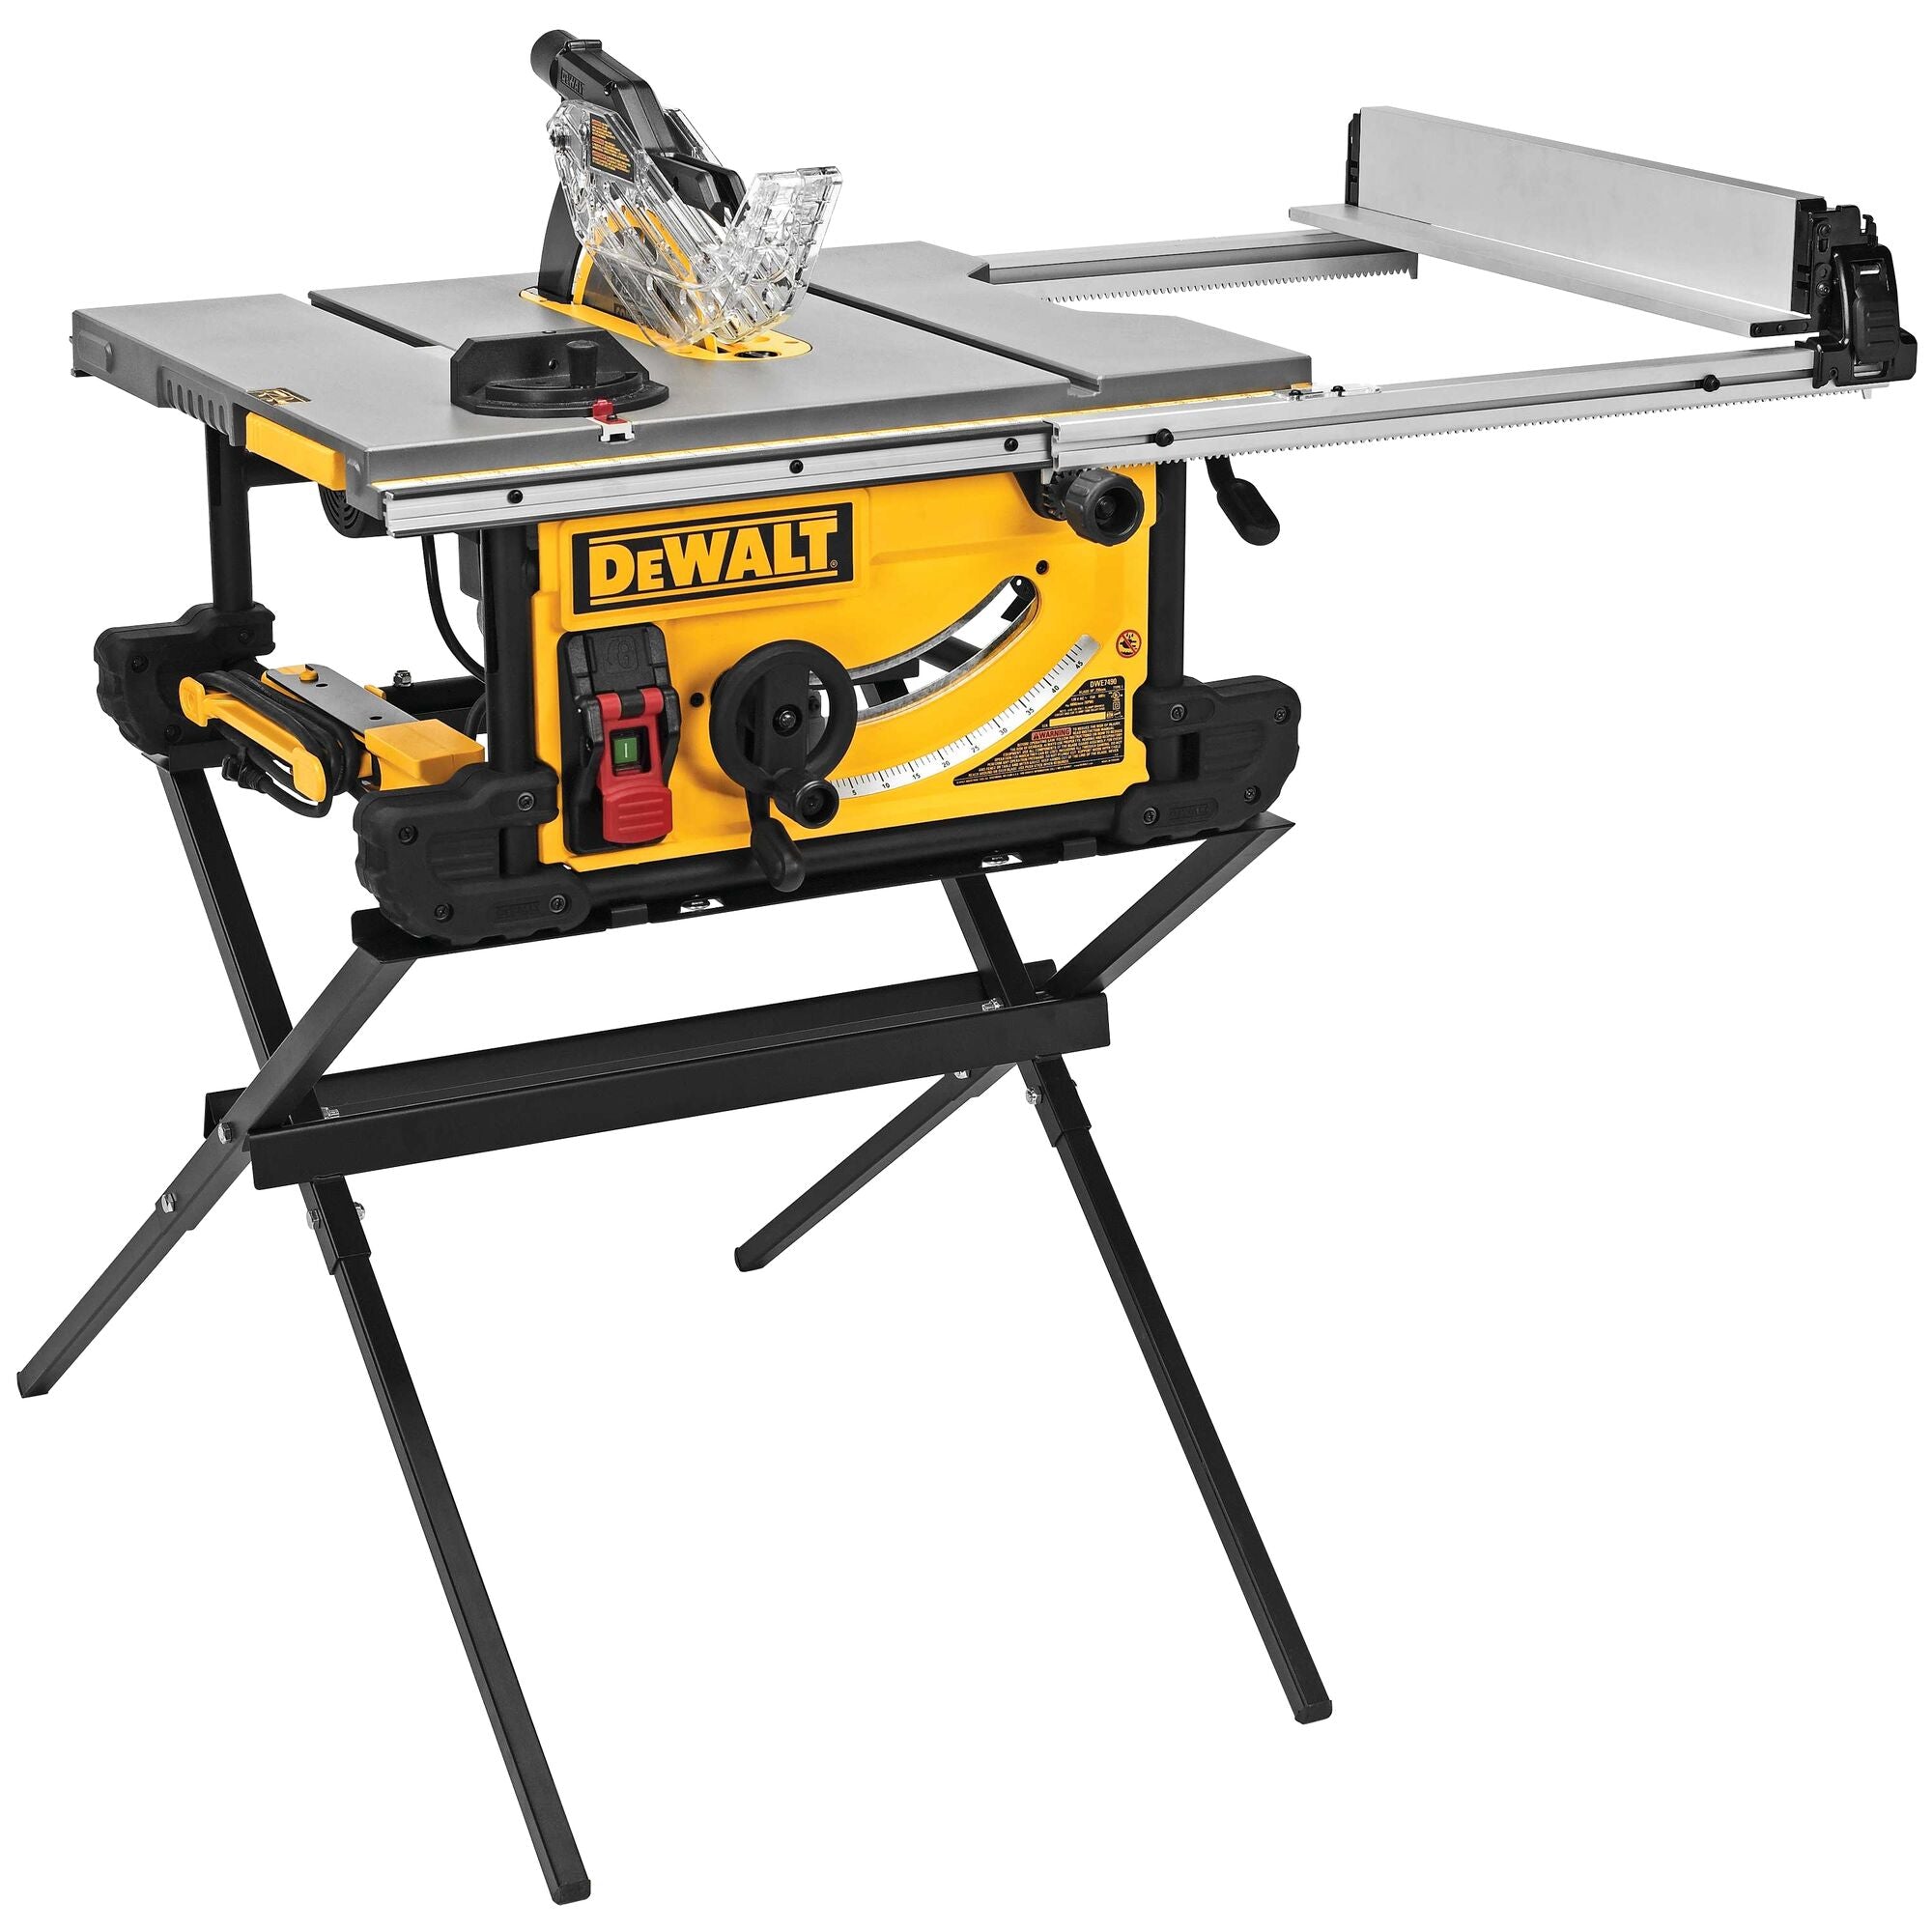 10" Table Saw Jobsite Table Saw 32-1/2" Rip Capacity with Stand